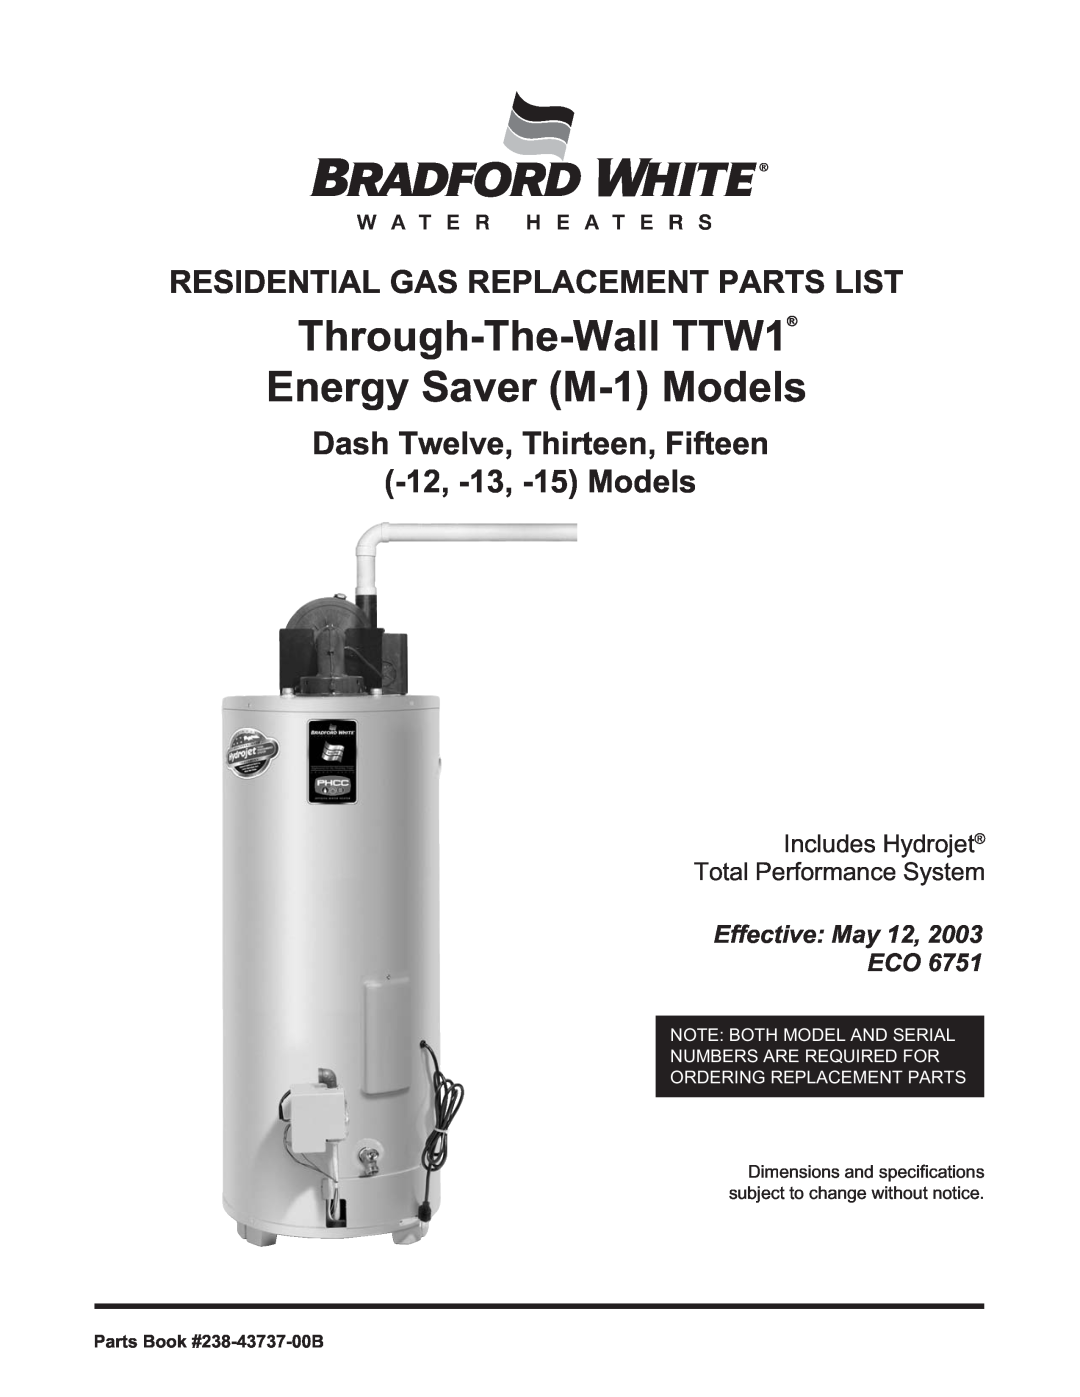 Bradford-White Corp 12 dimensions Through-The-Wall TTW1 Energy Saver M-1 Models, Residential Gas Replacement Parts List 